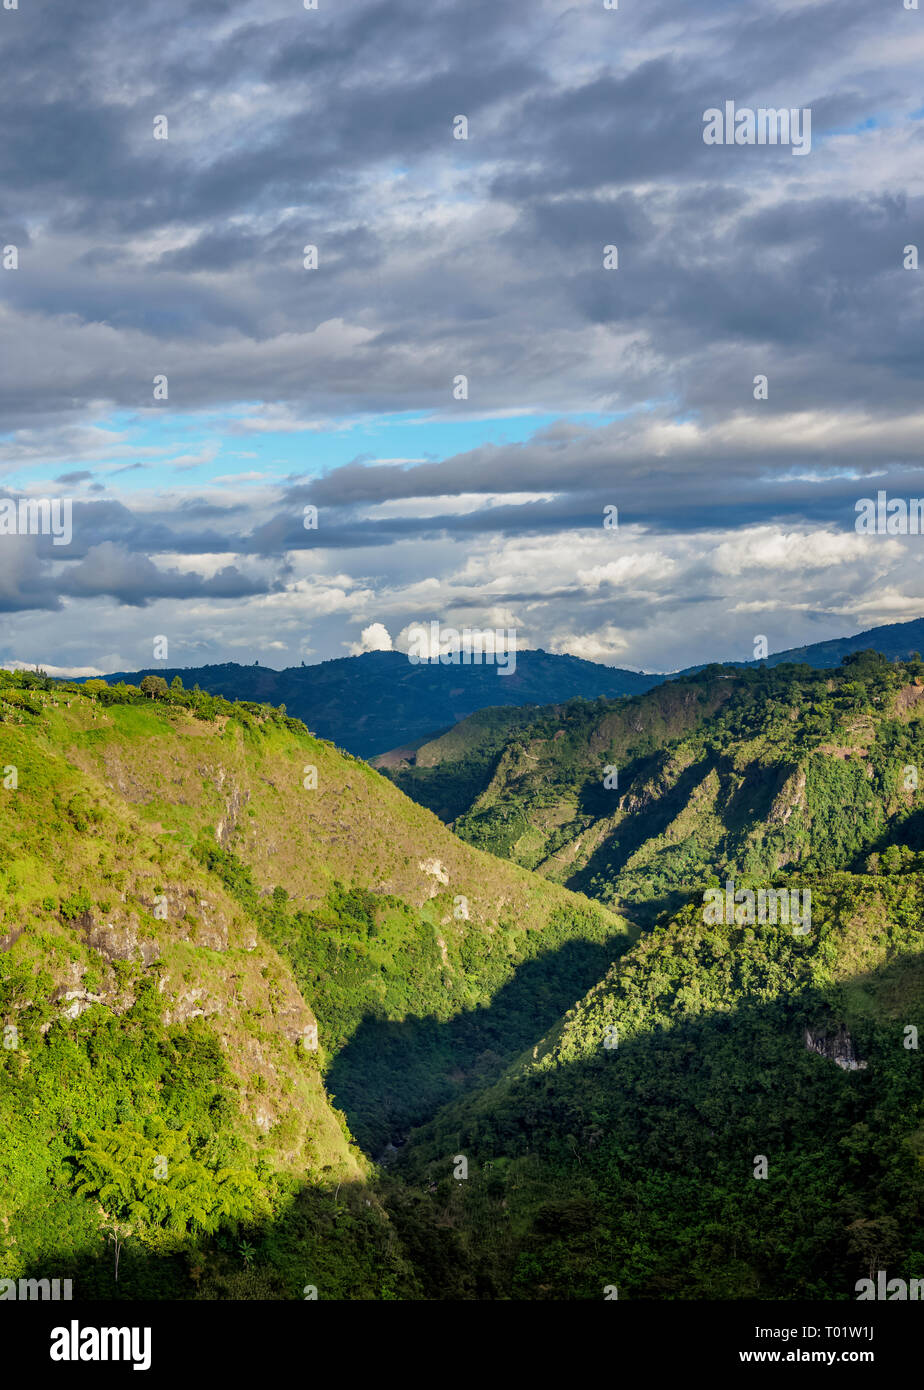 Magdalena River Valley seen from La Chaquira, San Agustin, Huila Department, Colombia Stock Photo